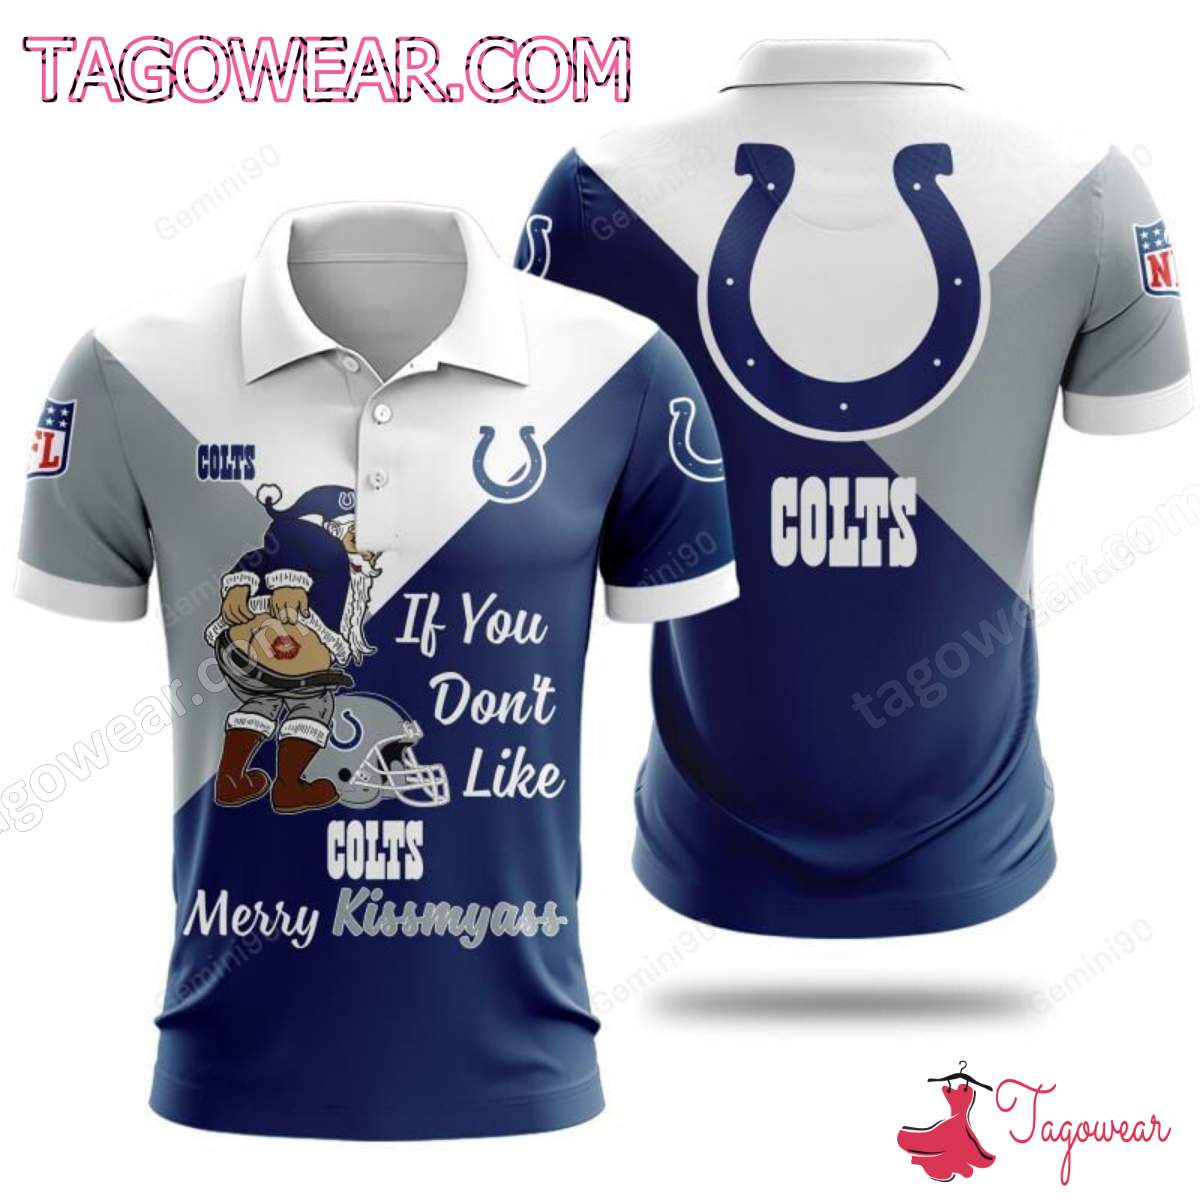 If You Don't Like Indianapolis Colts Merry Kissmyass T-shirt, Polo, Hoodie